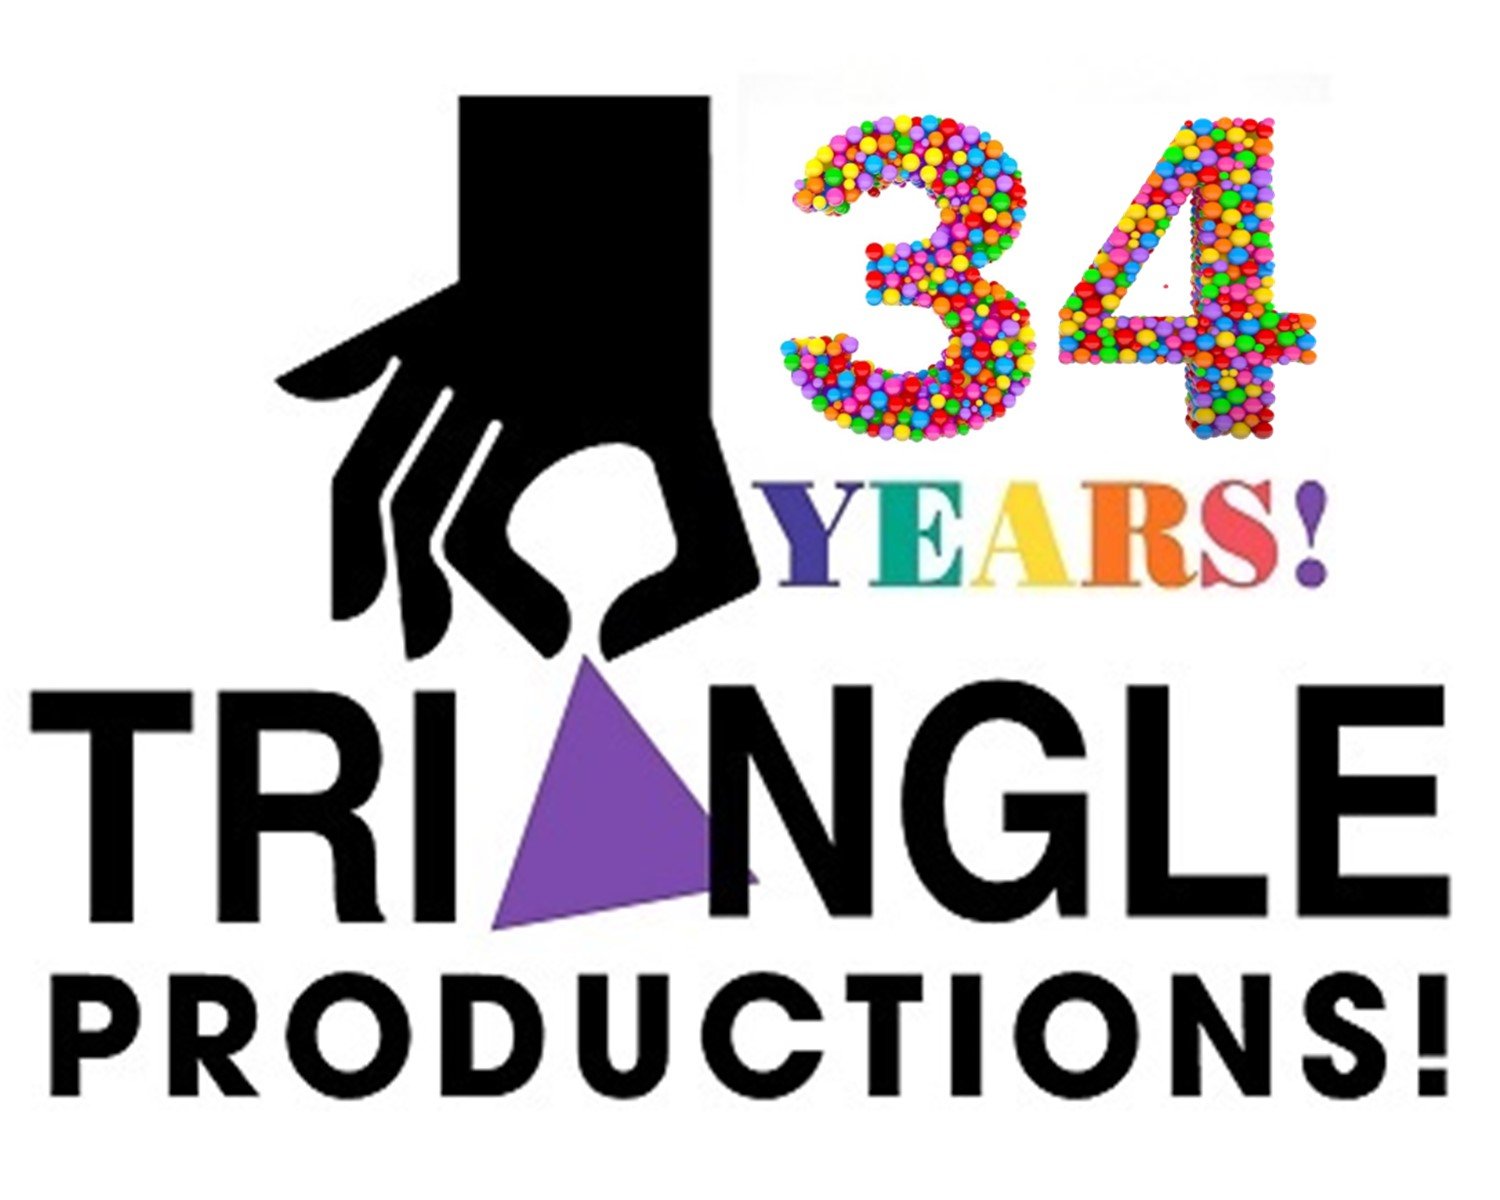 triangle productions!